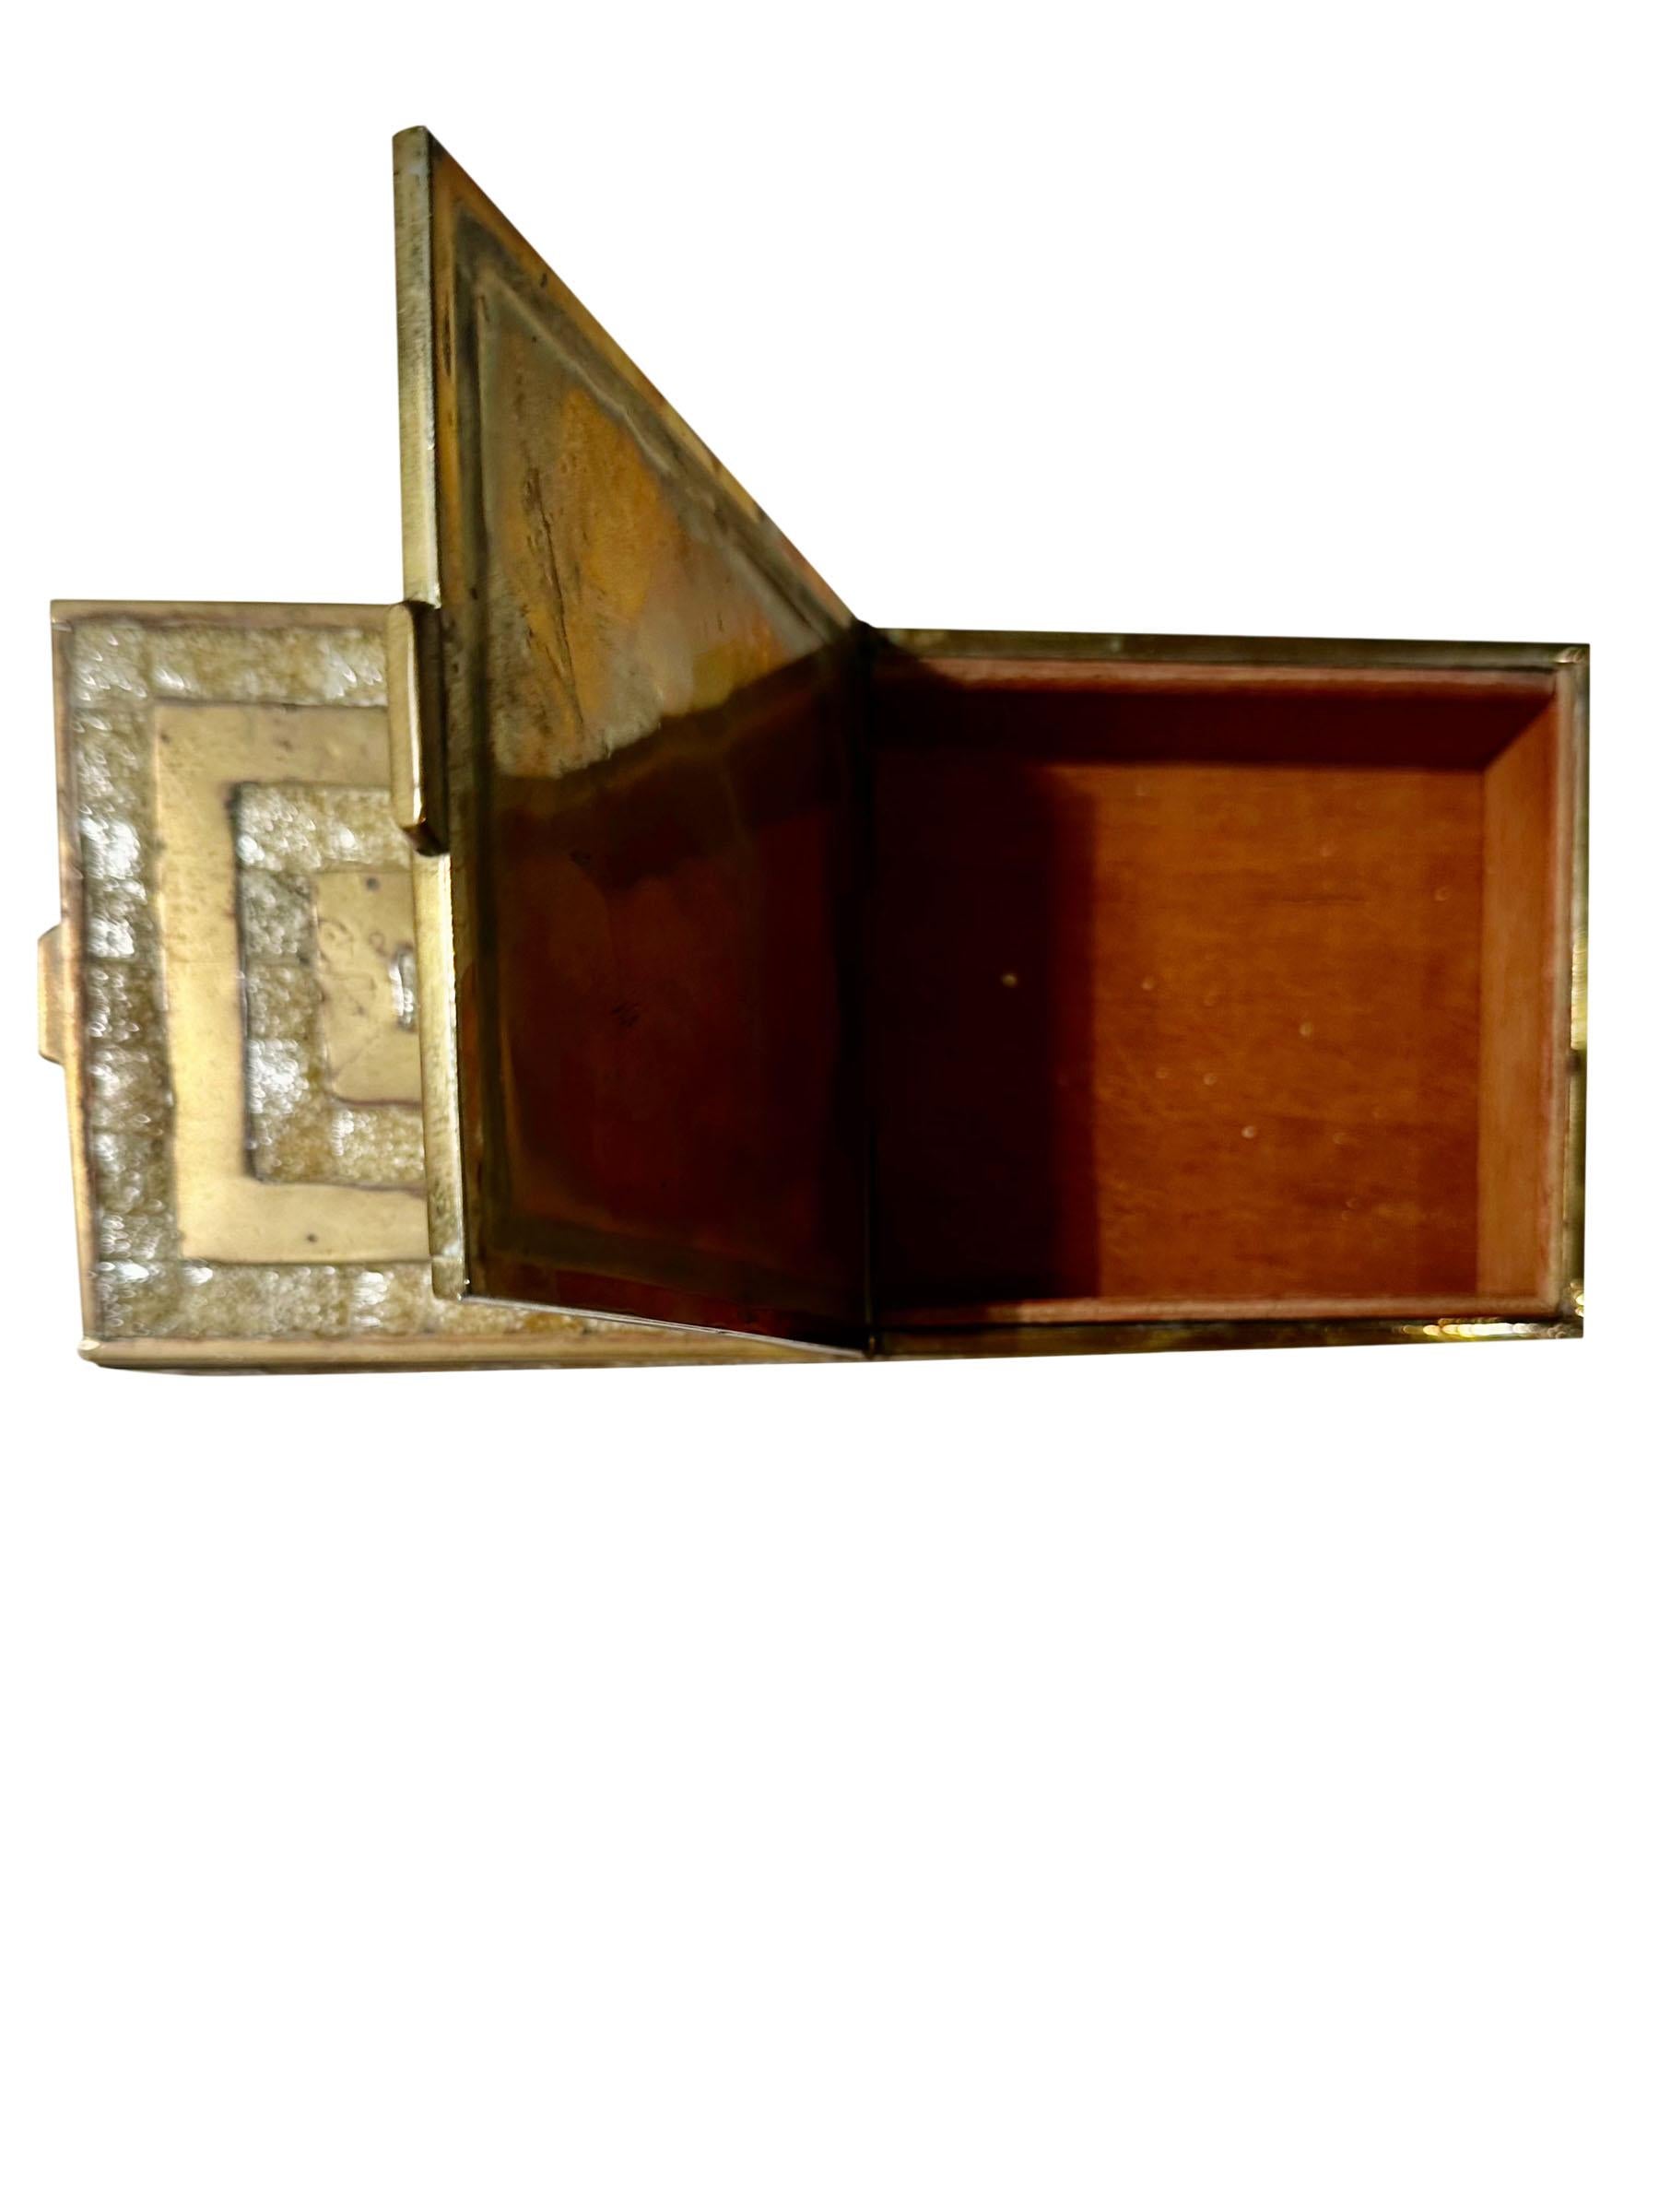 Mid-20th Century Brass Box With A Greek Key Design For Sale